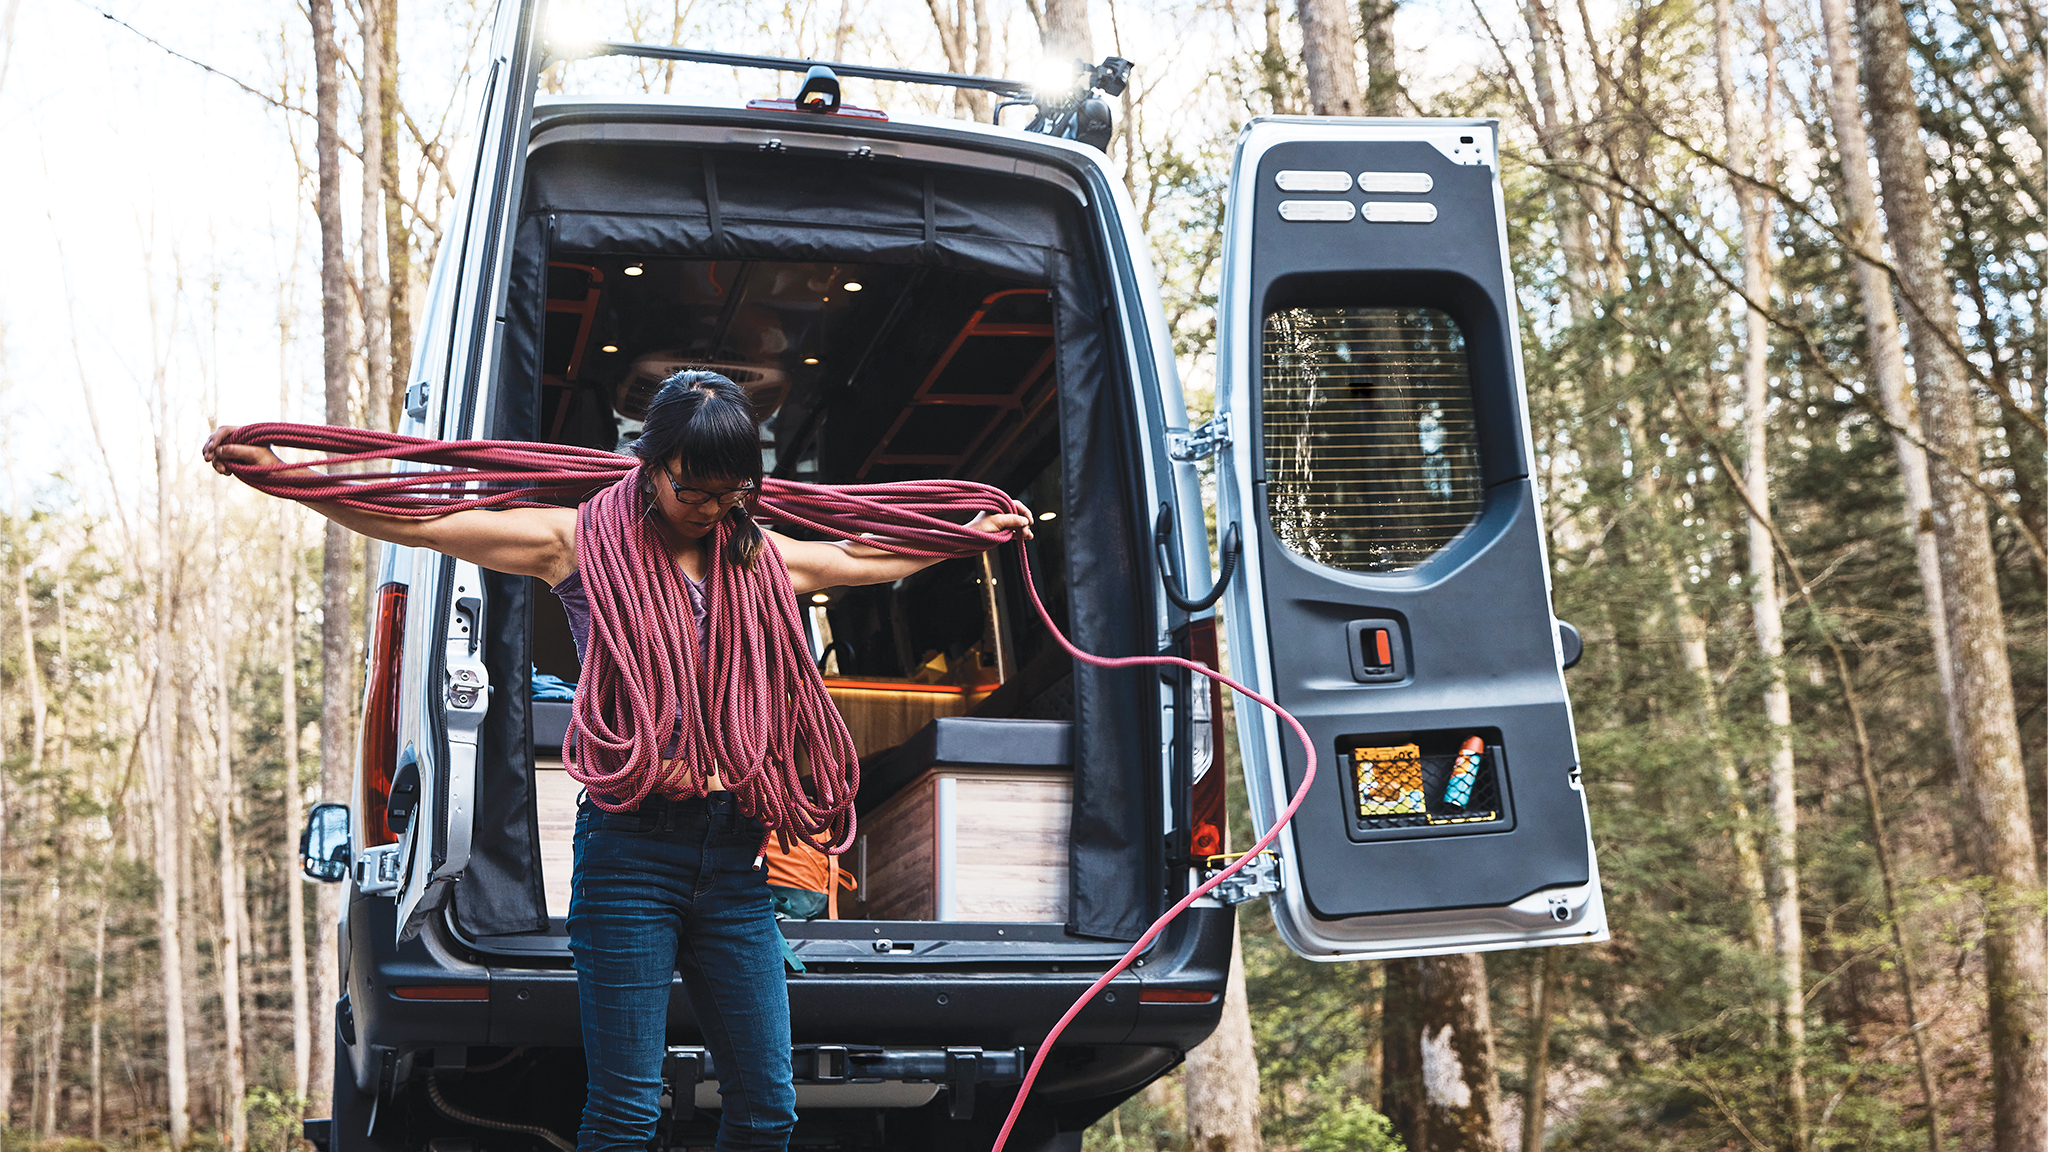 A woman getting her rope ready for a climb with her gear in her Airstream 24X Class B Motorhome in West Virgina